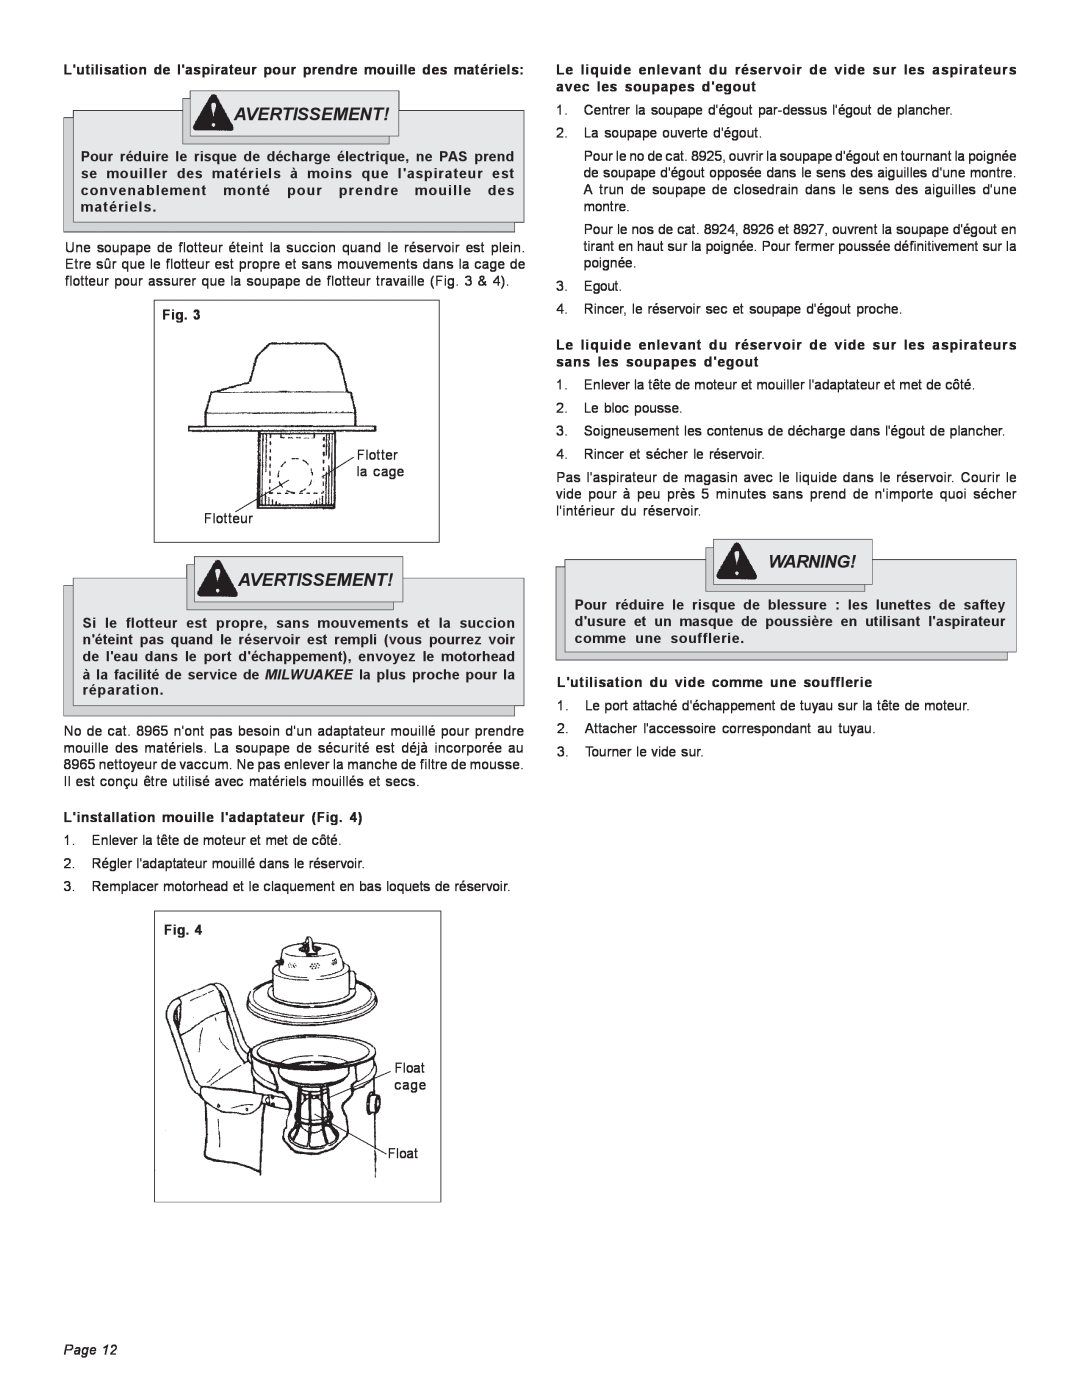 Milwaukee Heavy-Duty Commercial Vacuum manual Avertissement, Page 